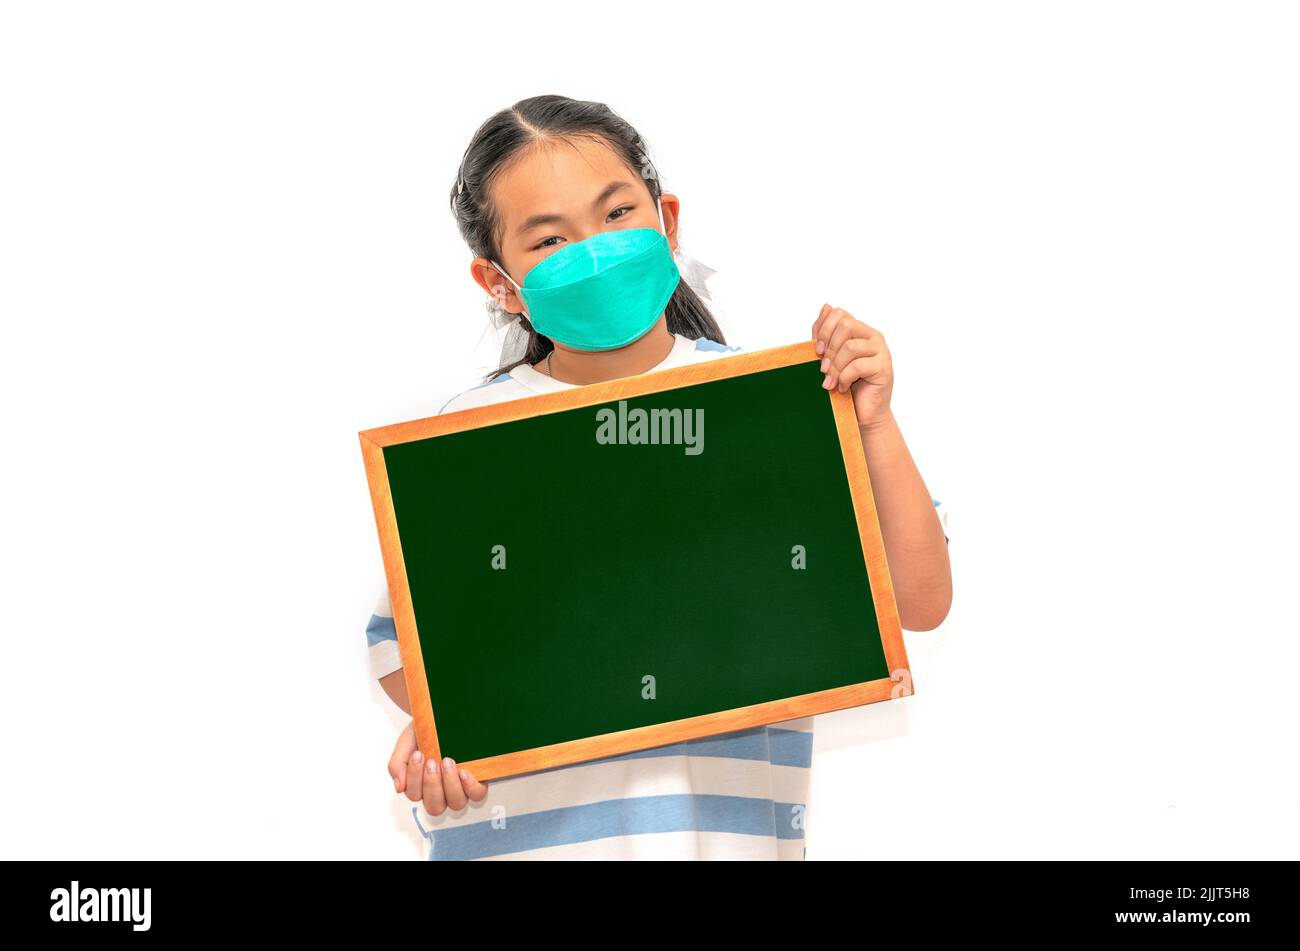 Portrait Asian student child in casual, holding small blackboard or chalkboard, wearing face mask, isolated image on white background, concept for bac Stock Photo